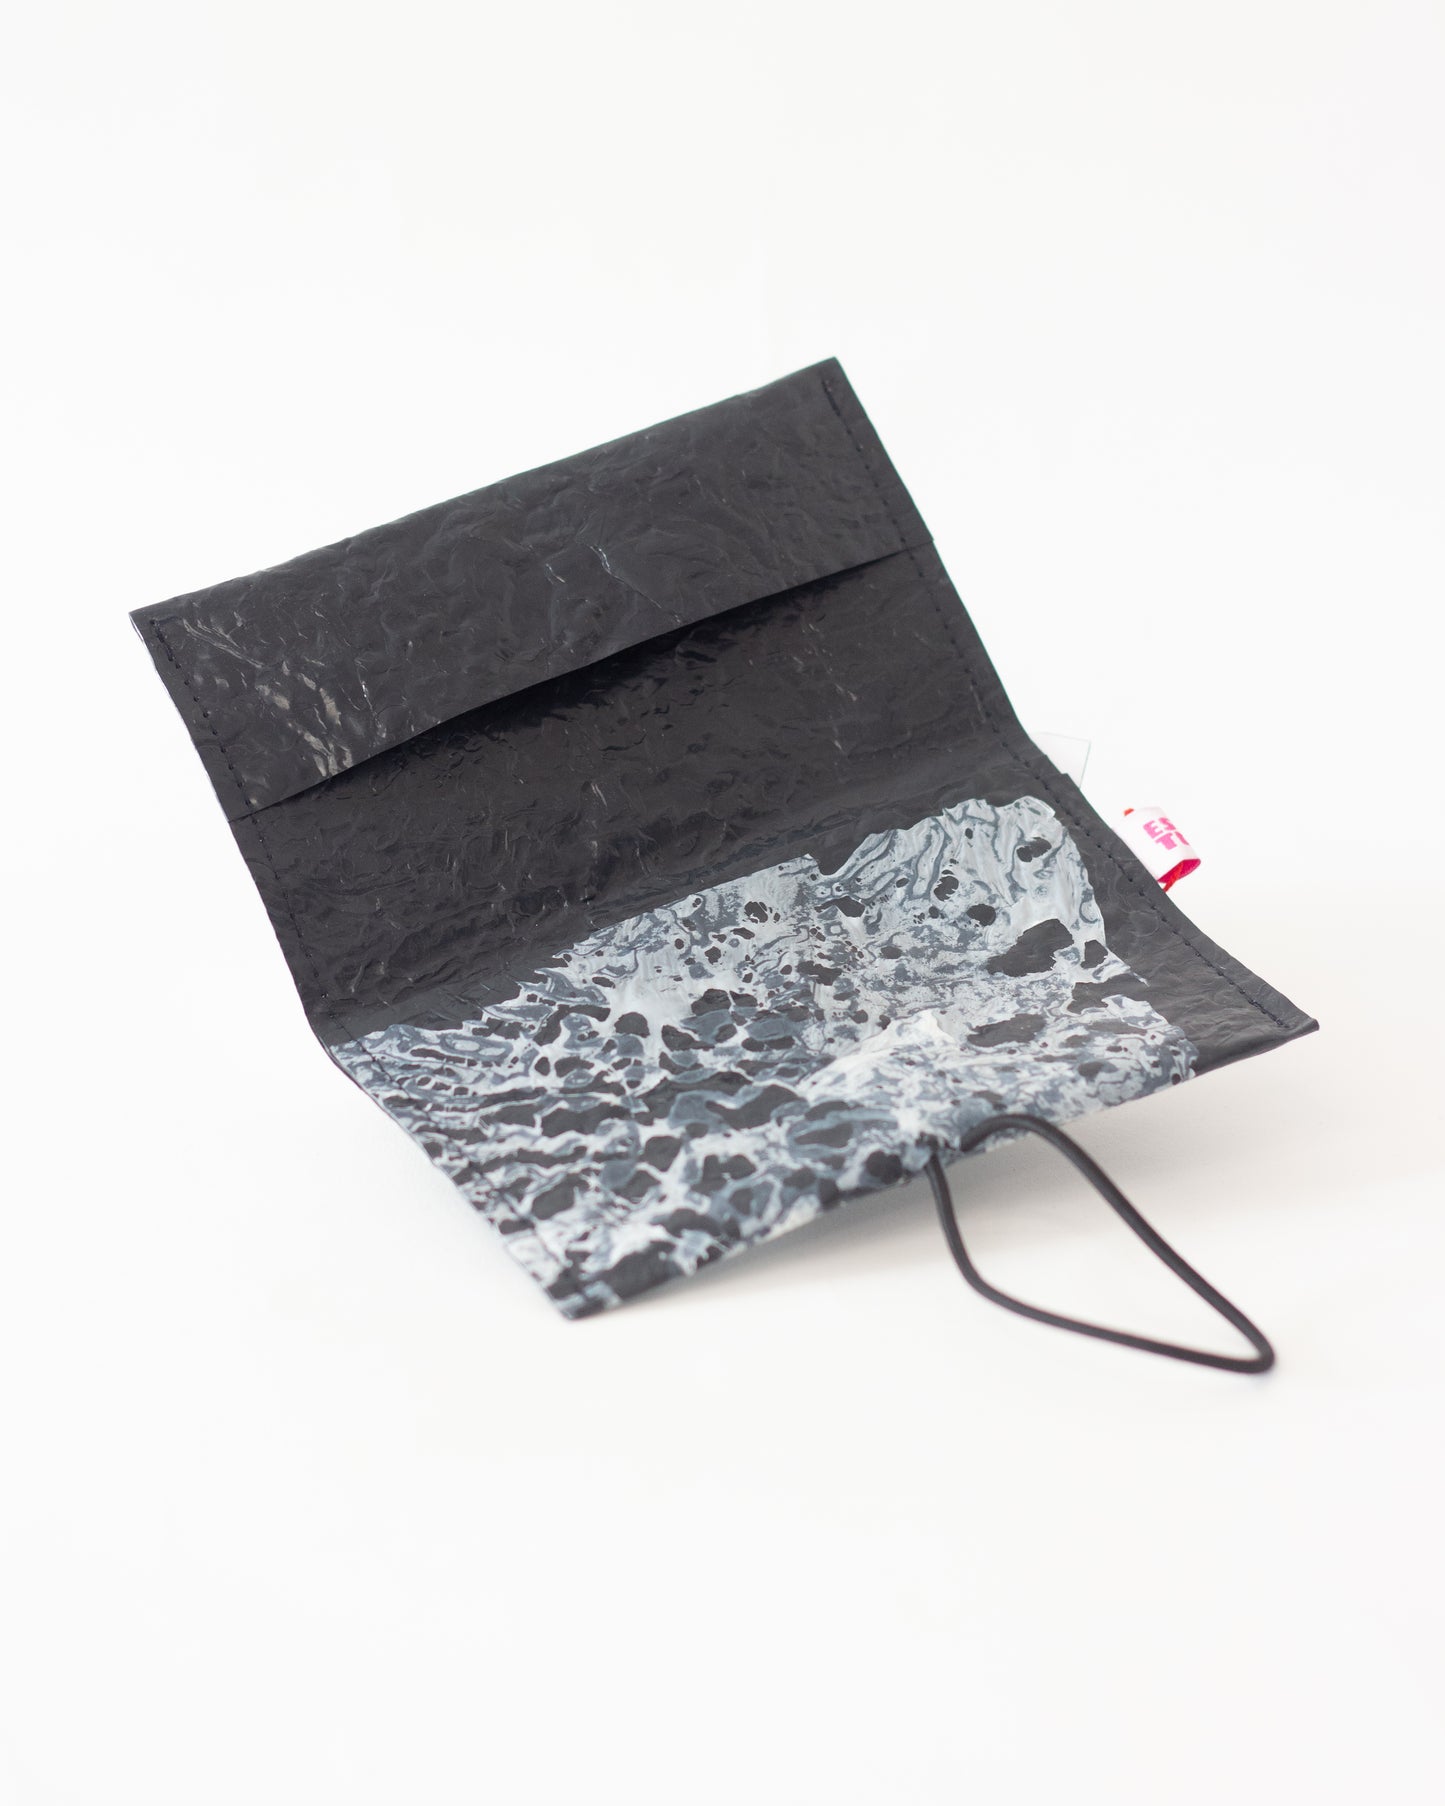 Recycled Plastic Tobacco Pouch